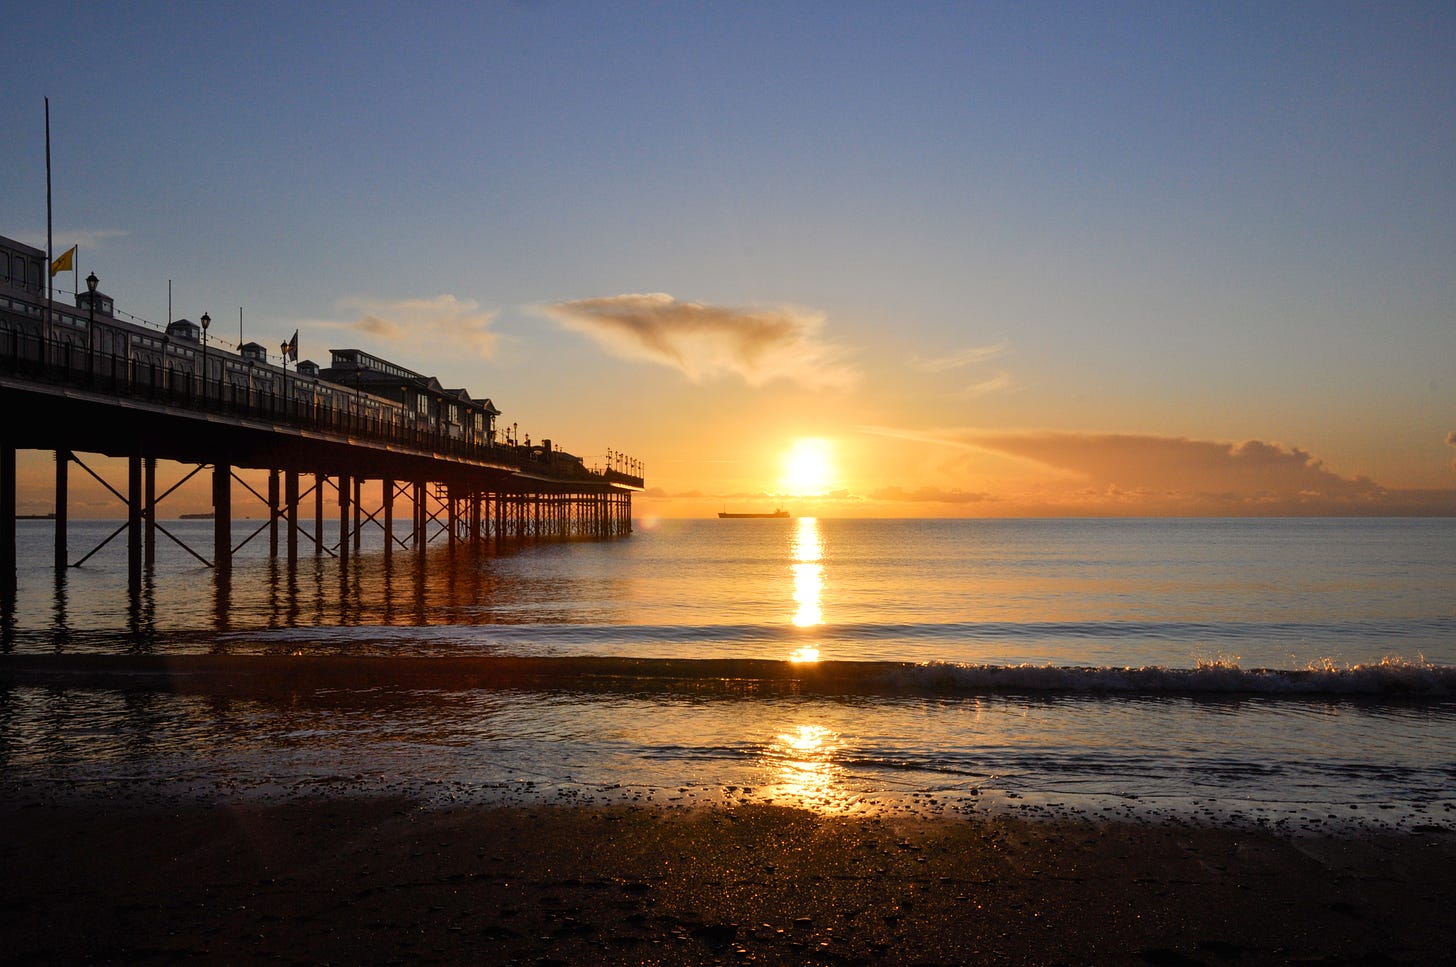 An image of the sunrise above the sea. Paignton pier is to the left, stretching out toward the sun. The sky is orange close to the horizon and clear blue further out. The sea reflects a column of warm yellow light.